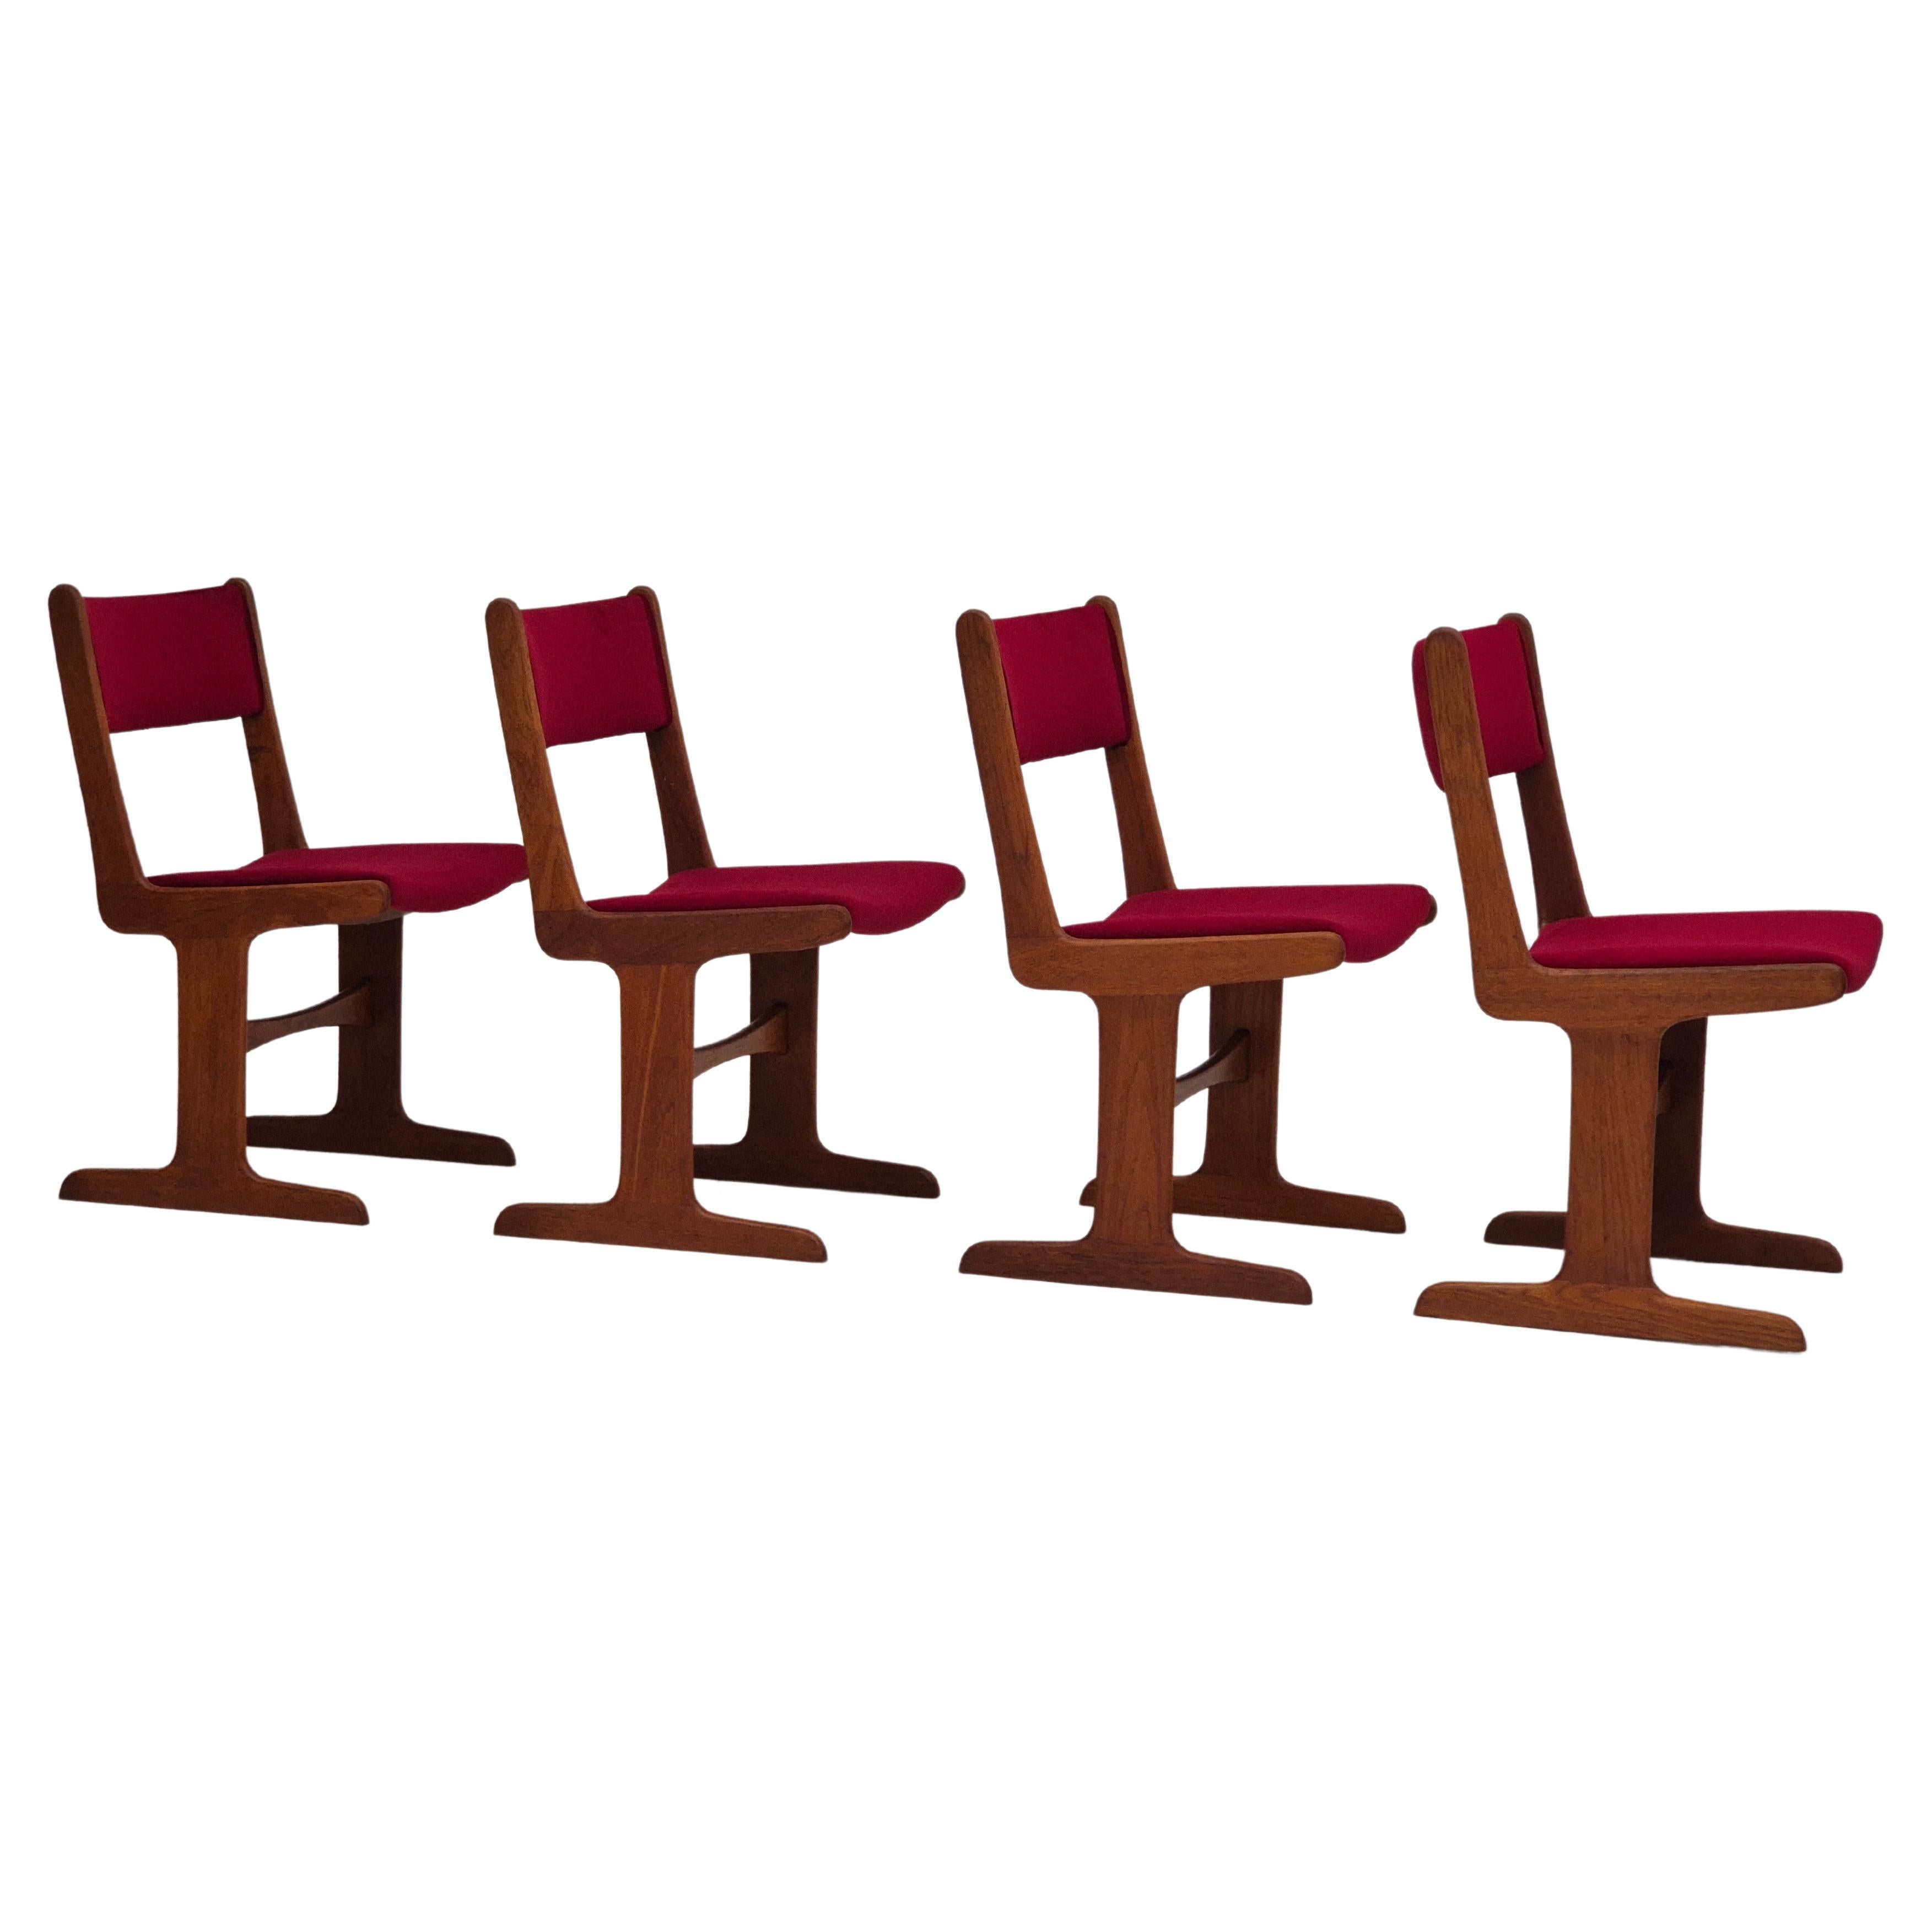 1970s, set of 4 reupholstered Danish chairs, teak wood, cherry-red velour.